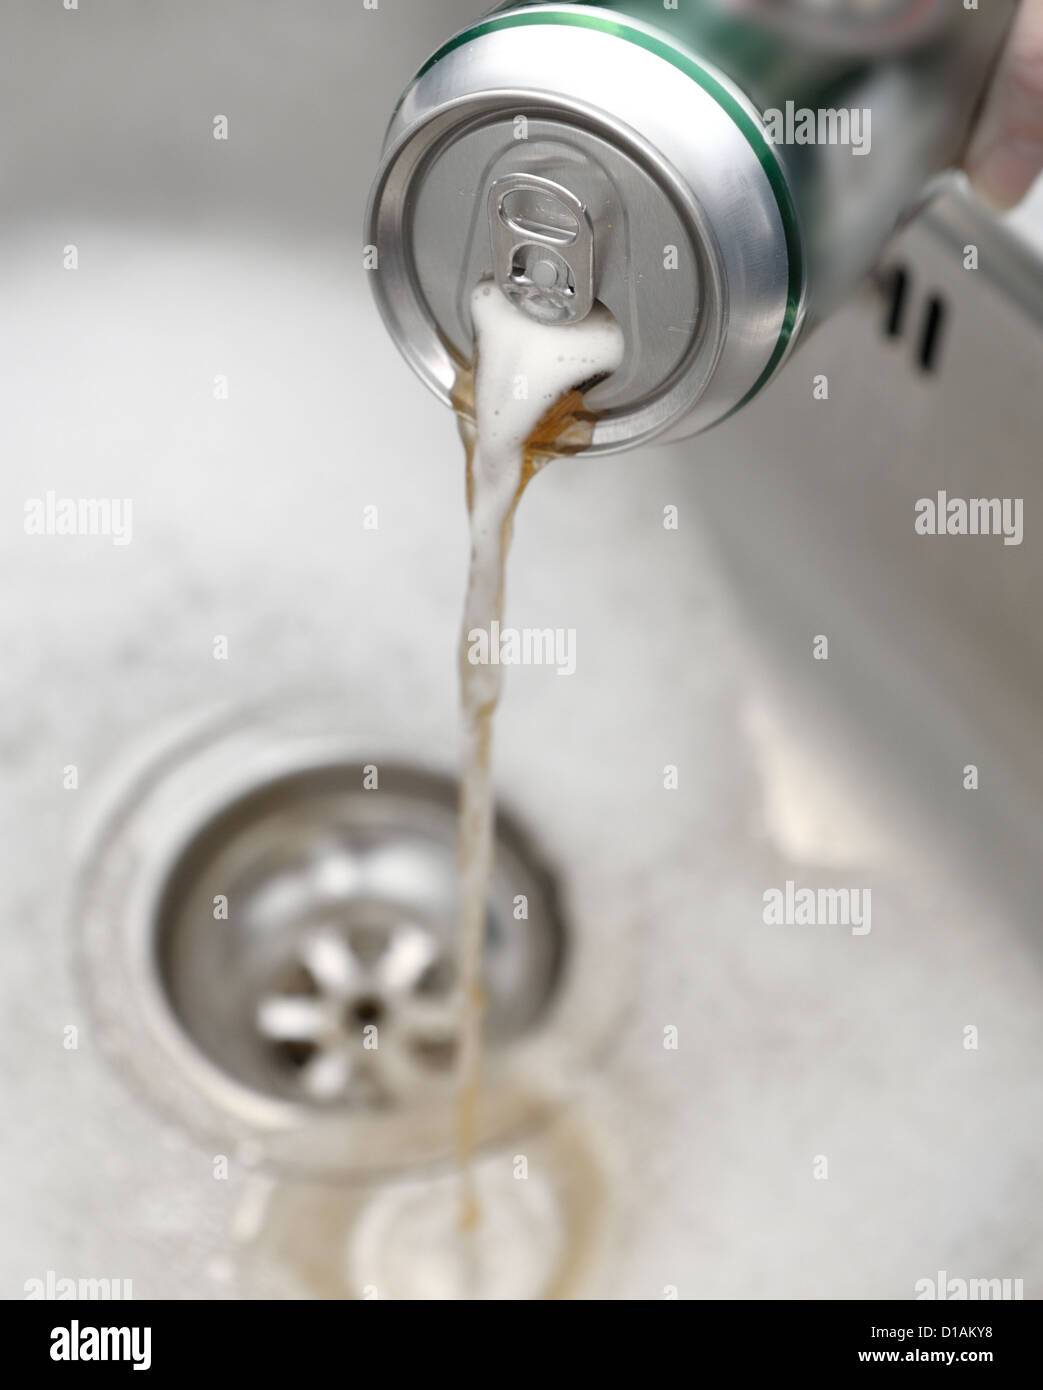 pouring cans of beer down the sink (cans digitally blurred to hide brand logos) Stock Photo